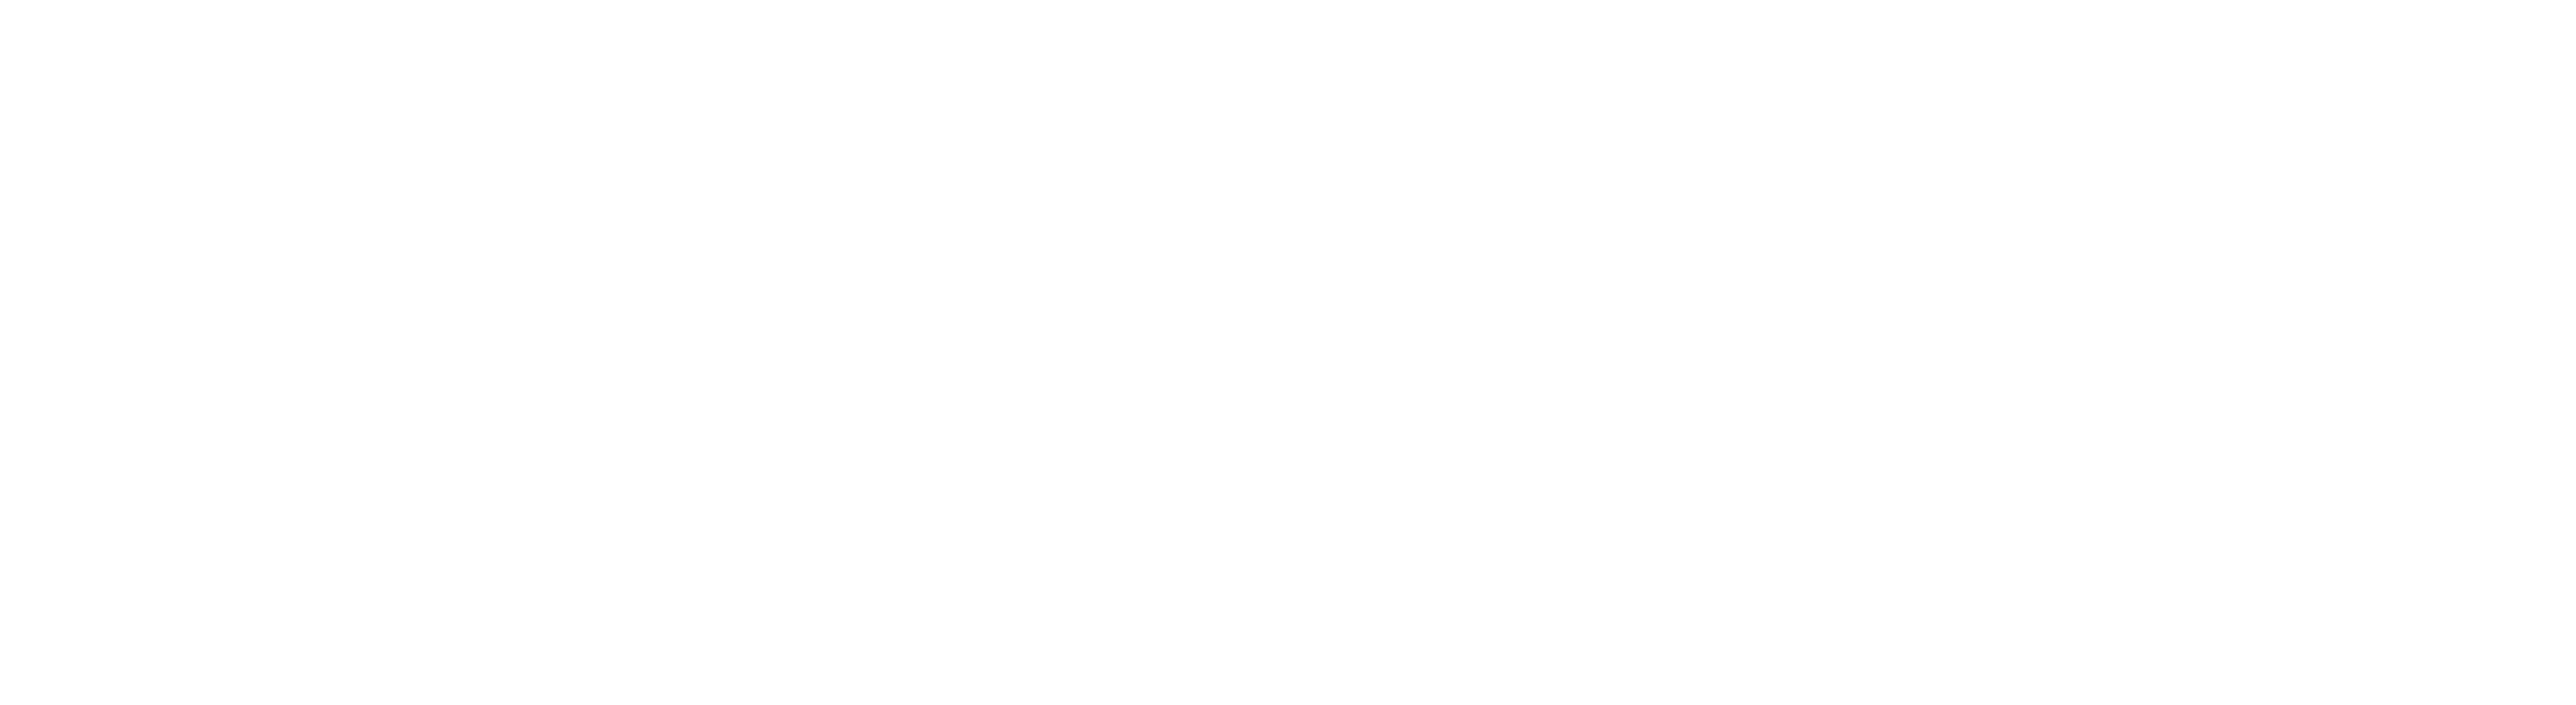 orsted_logo_white_rgb.png